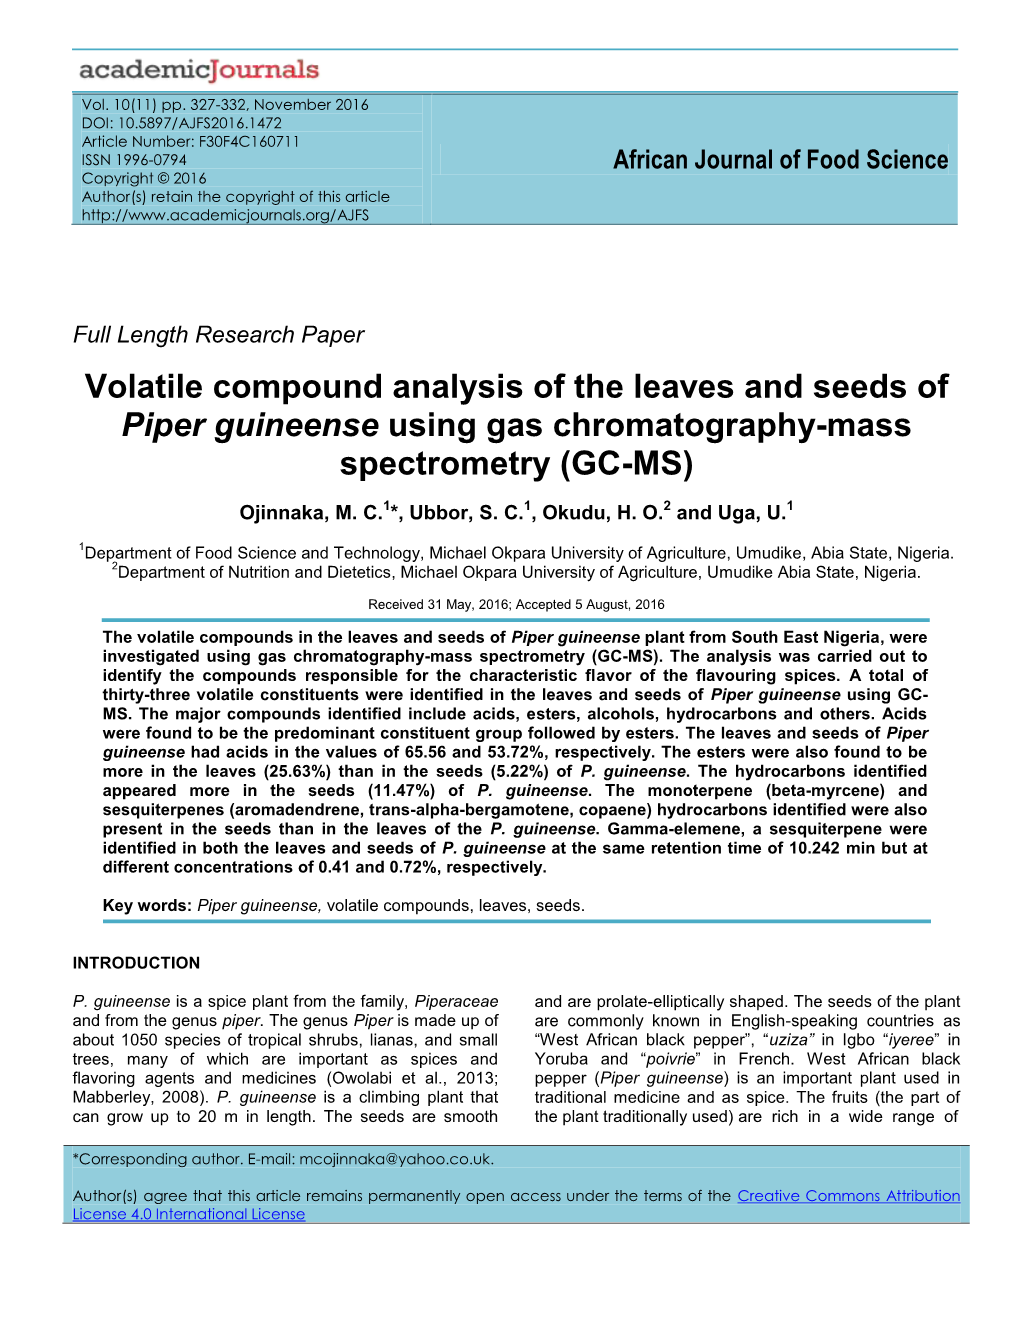 Volatile Compound Analysis of the Leaves and Seeds of Piper Guineense Using Gas Chromatography-Mass Spectrometry (GC-MS)